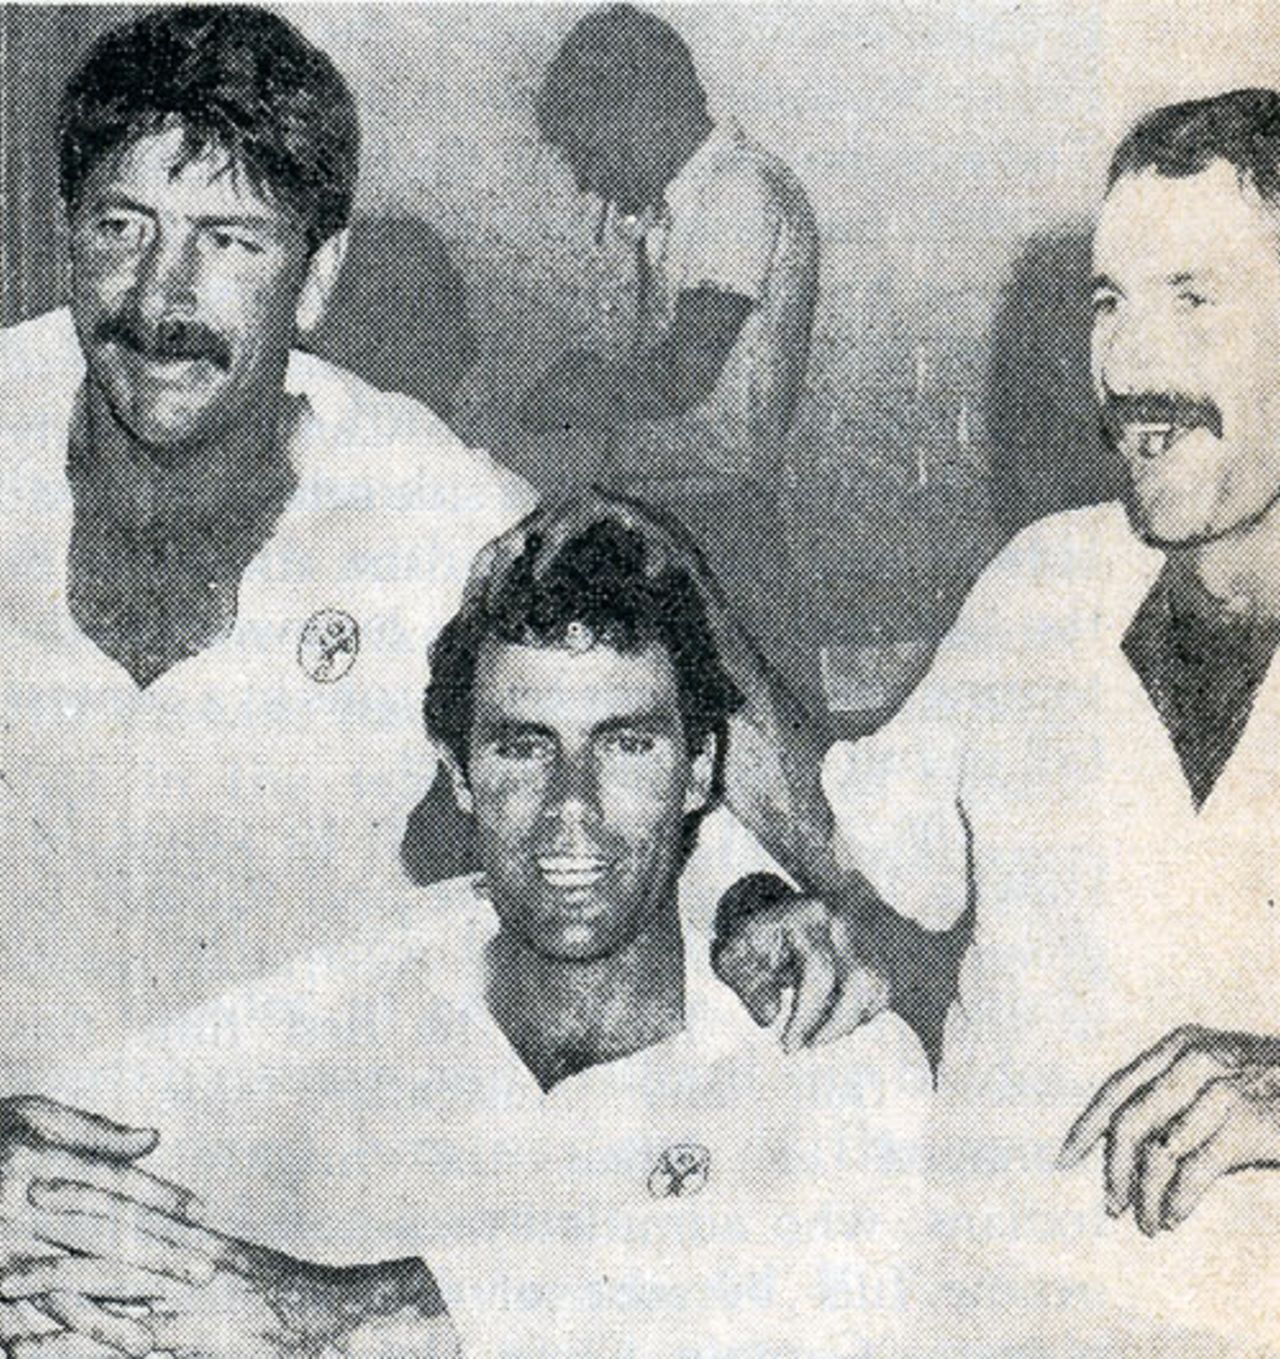 Rod Marsh, Greg Chappell and Dennis Lillee after their last Test, Australia v Pakistan, 5th Test, Sydney, January 6, 1984